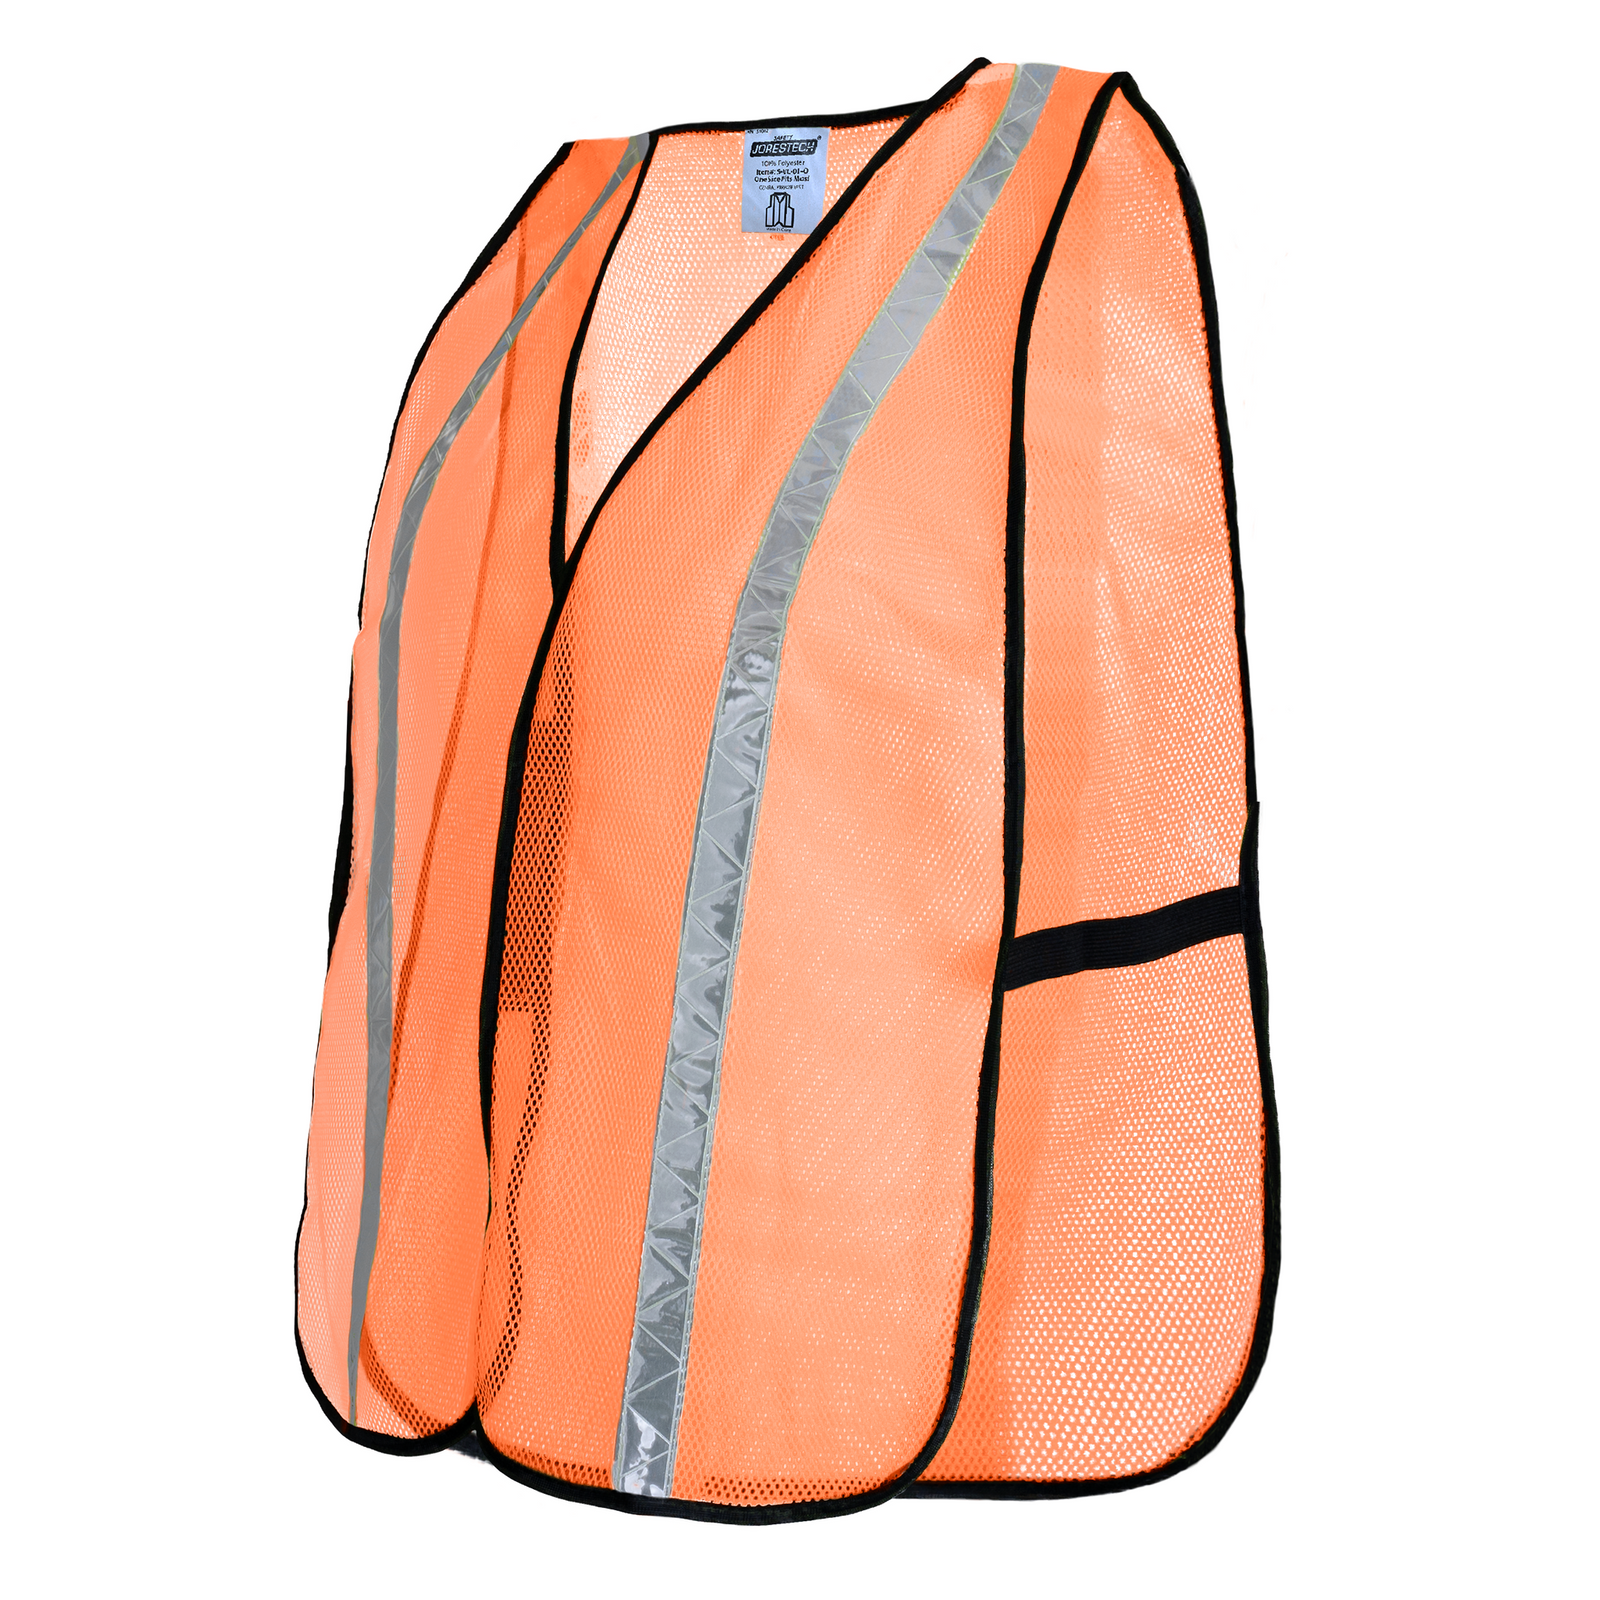 Diagonal view of an orange high visibility JORESTECH® mesh safety vest with 1 inch reflective strip and black side elastic straps 